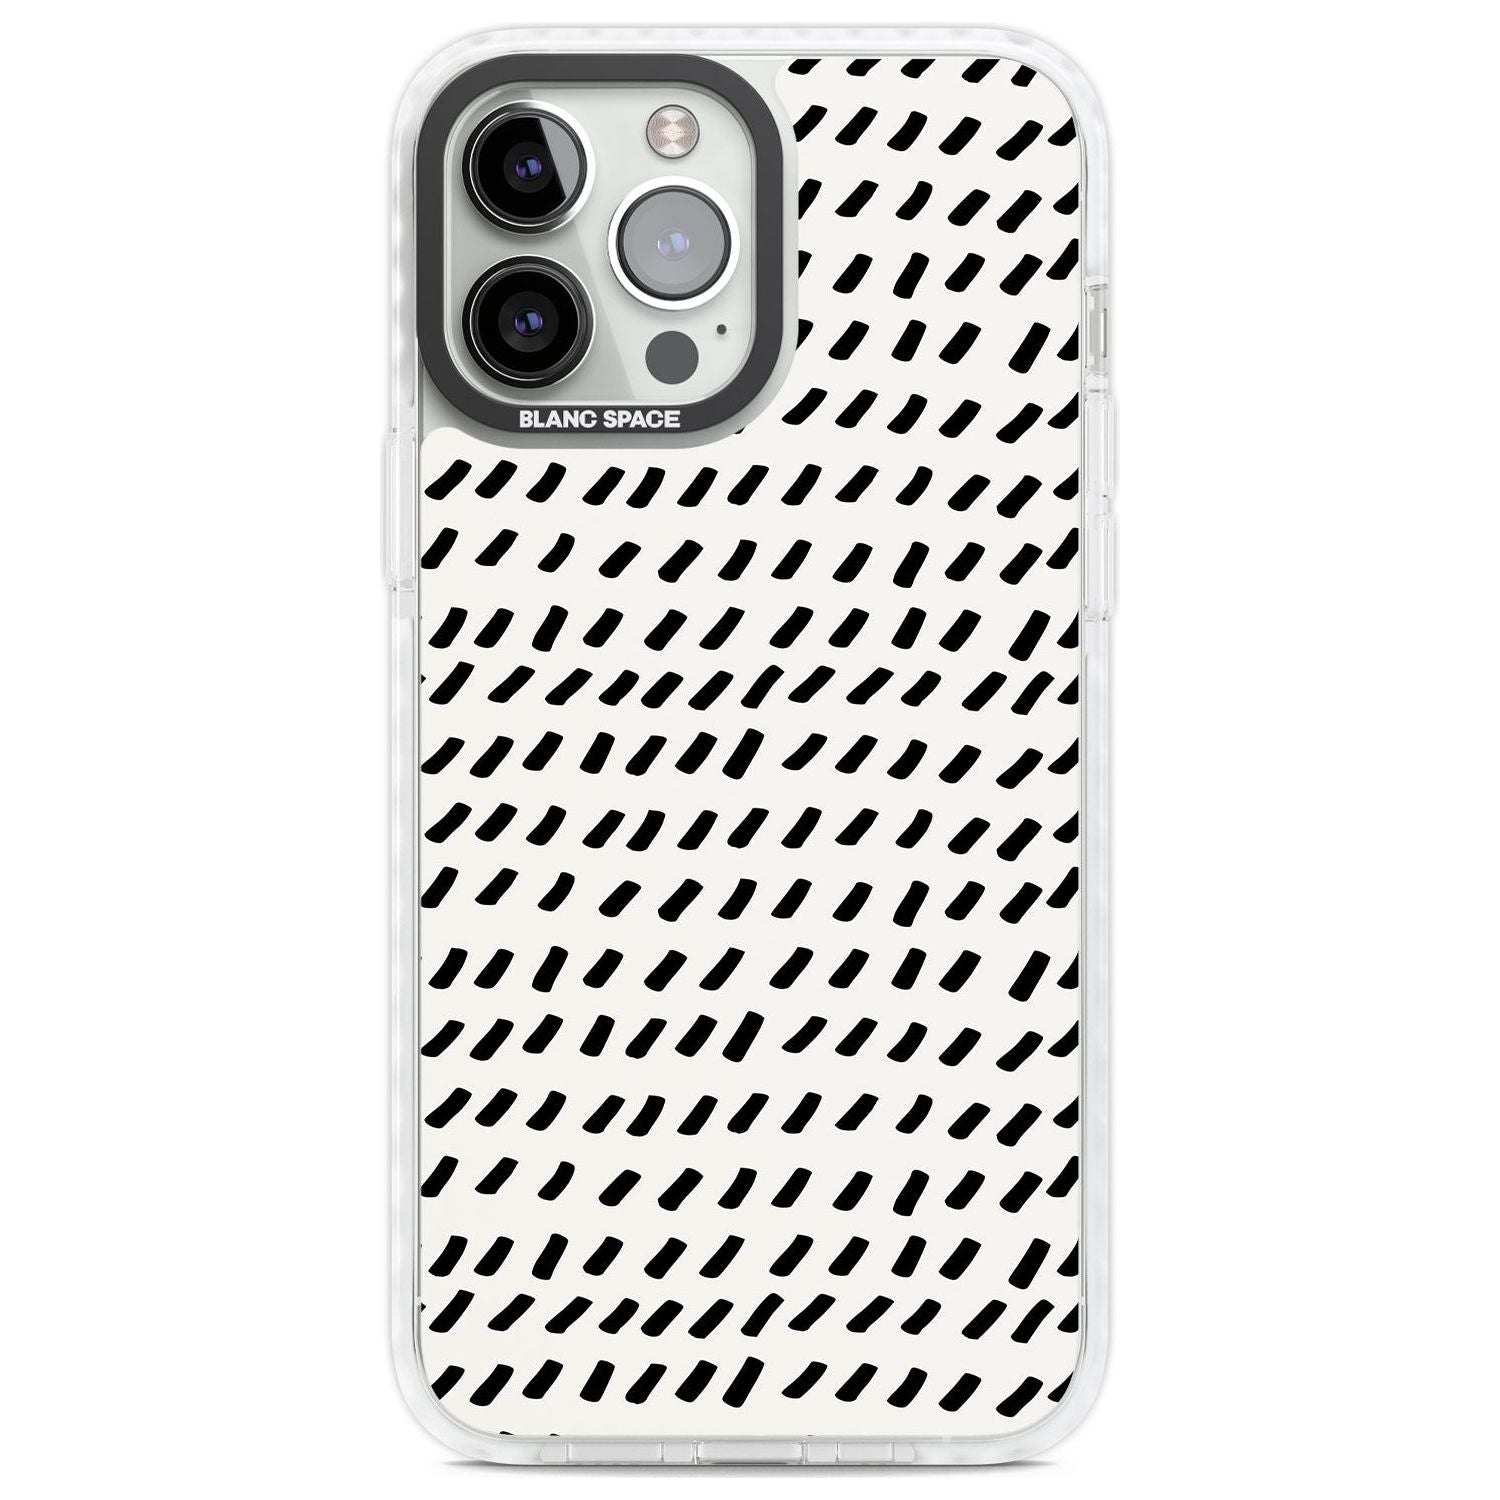 iPhone 14 Pro Max Cases - Blanc Space